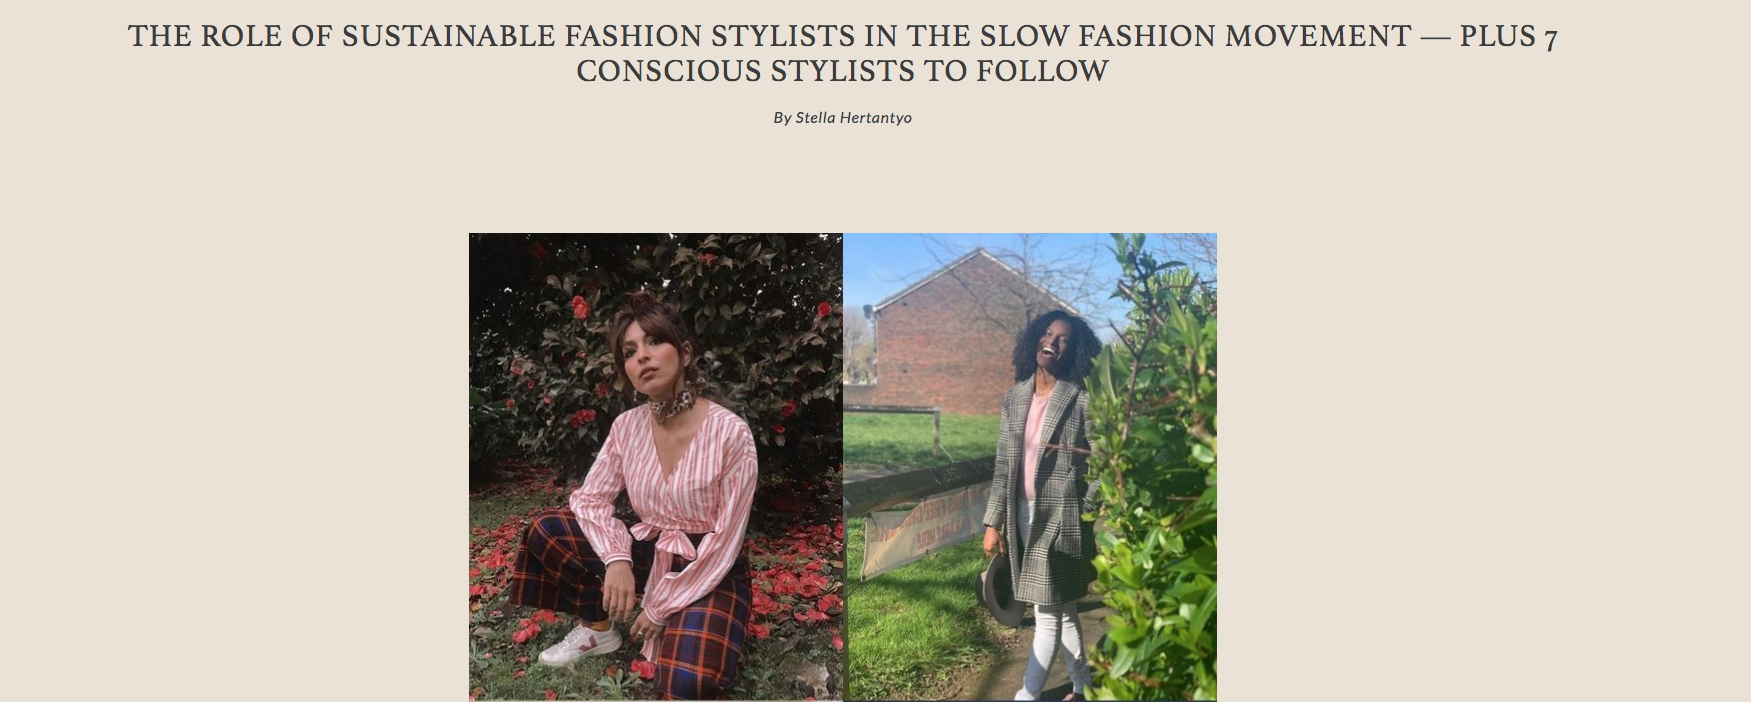 THE ROLE OF SUSTAINABLE FASHION STYLISTS IN THE SLOW FASHION MOVEMENT — PLUS 7 CONSCIOUS STYLISTS TO FOLLOW